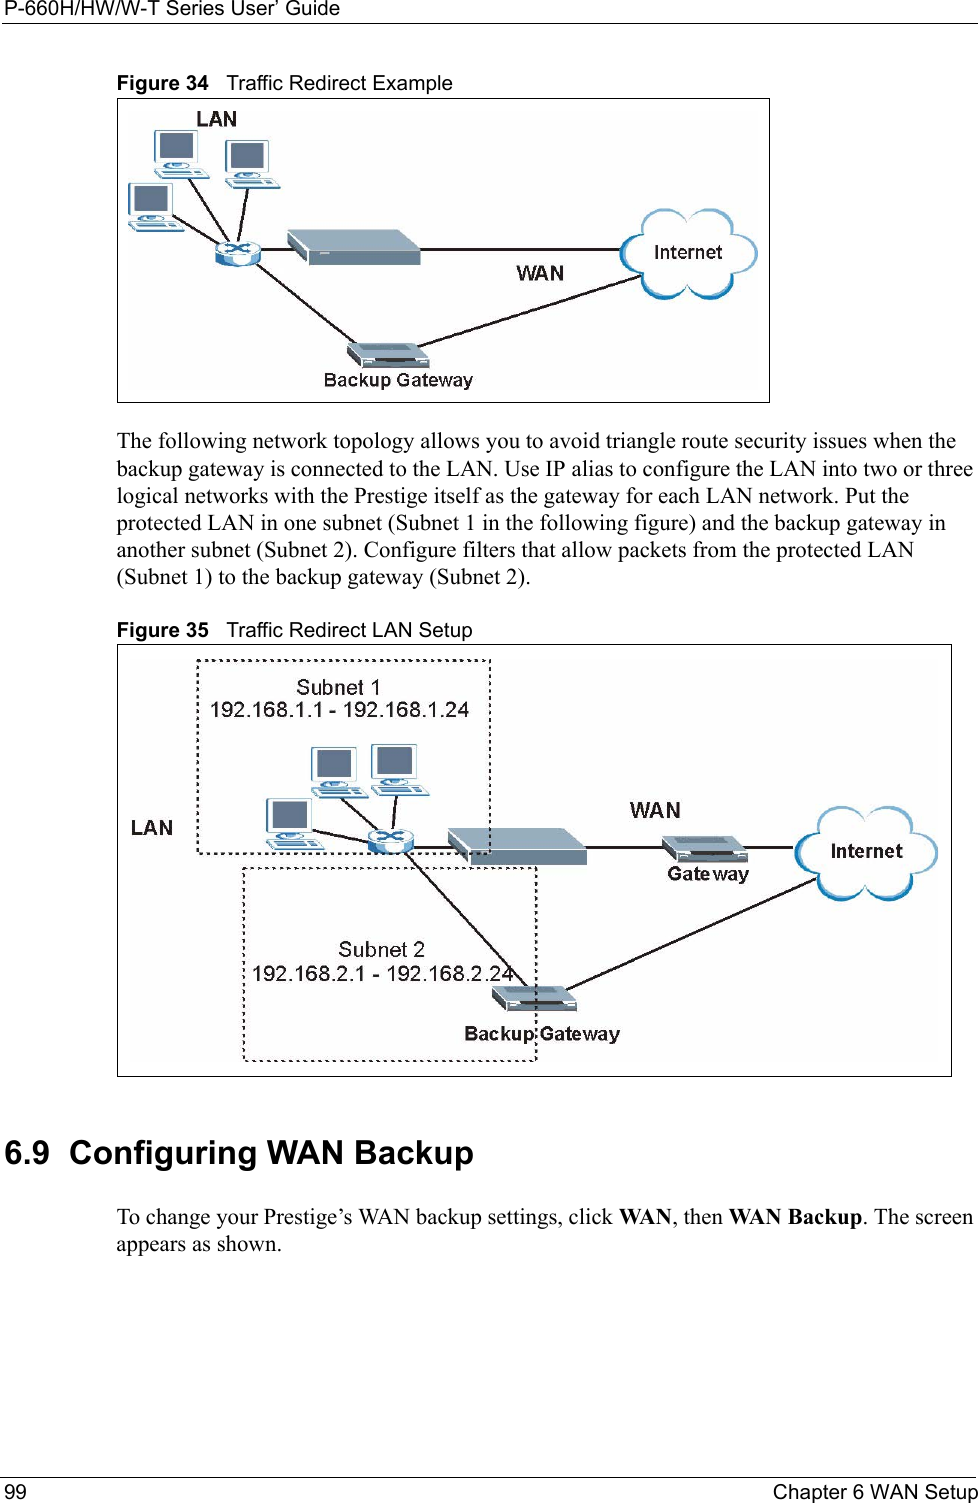 P-660H/HW/W-T Series User’ Guide99 Chapter 6 WAN SetupFigure 34   Traffic Redirect ExampleThe following network topology allows you to avoid triangle route security issues when the backup gateway is connected to the LAN. Use IP alias to configure the LAN into two or three logical networks with the Prestige itself as the gateway for each LAN network. Put the protected LAN in one subnet (Subnet 1 in the following figure) and the backup gateway in another subnet (Subnet 2). Configure filters that allow packets from the protected LAN (Subnet 1) to the backup gateway (Subnet 2). Figure 35   Traffic Redirect LAN Setup6.9  Configuring WAN Backup To change your Prestige’s WAN backup settings, click WA N , then WAN Backup. The screen appears as shown.